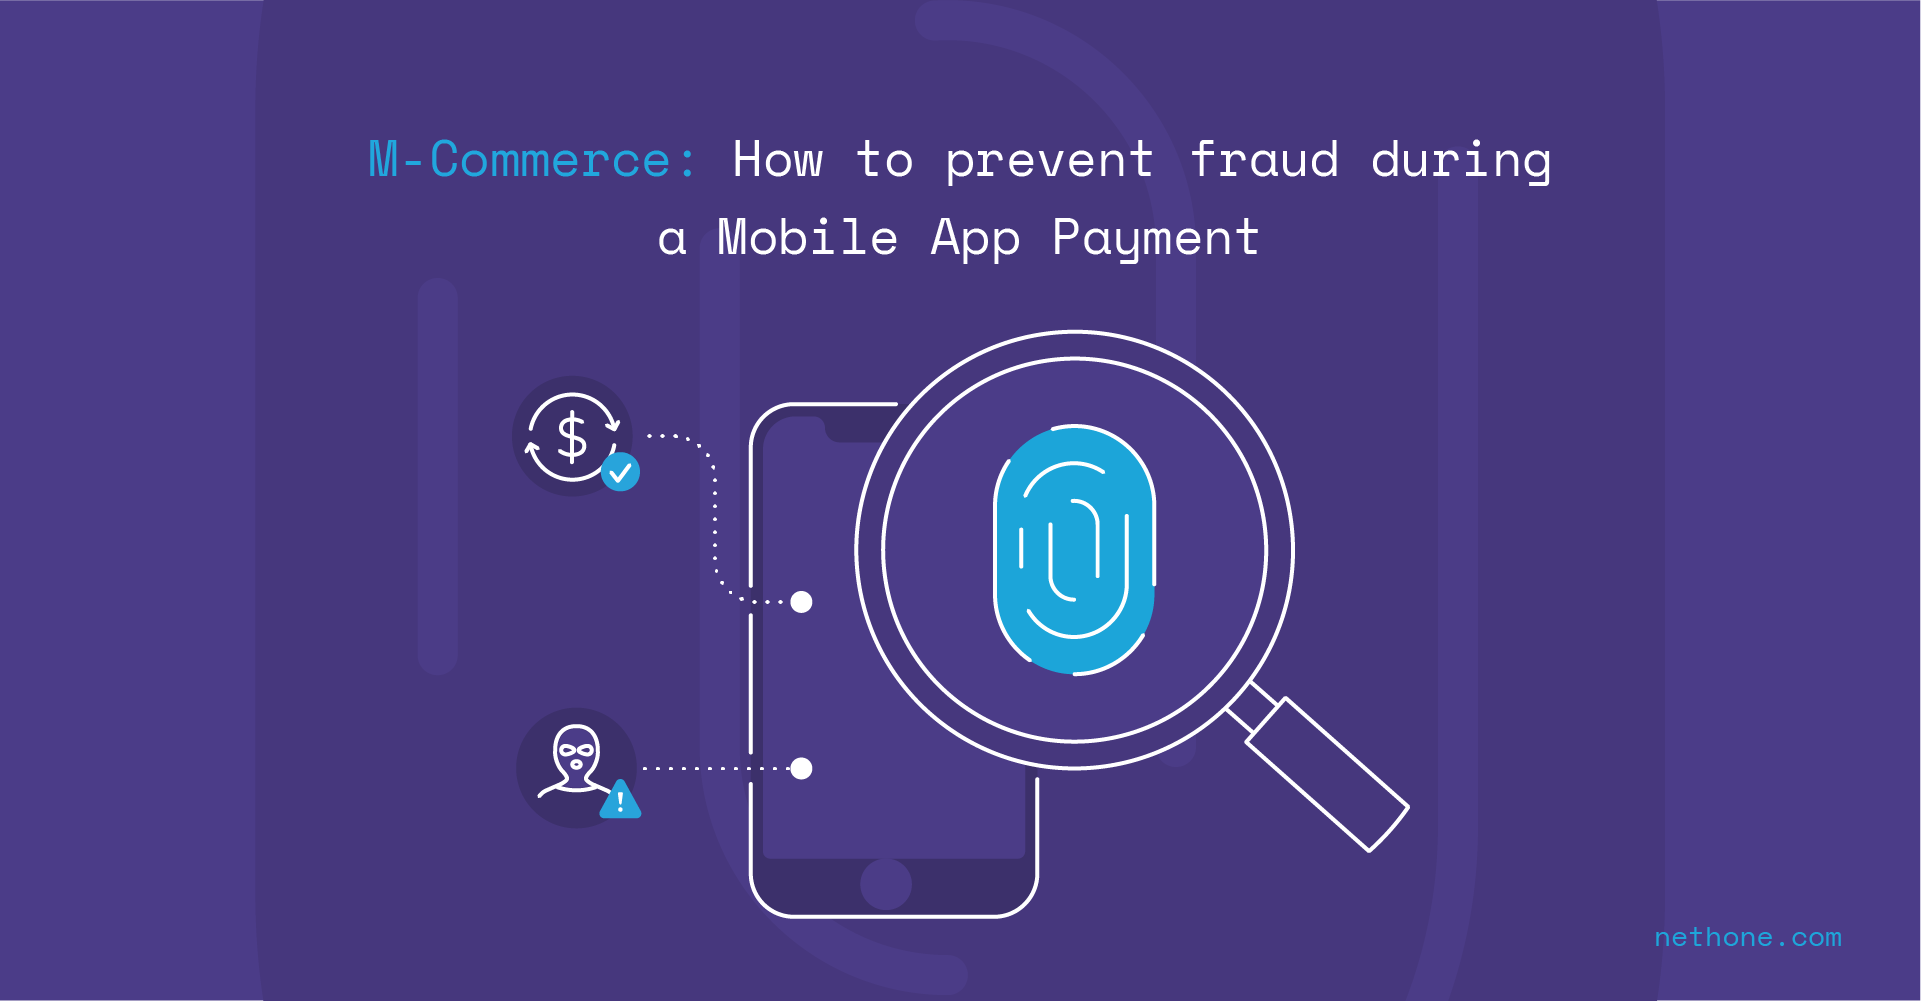 M-Commerce: How to Prevent Fraud during a Mobile App Payment